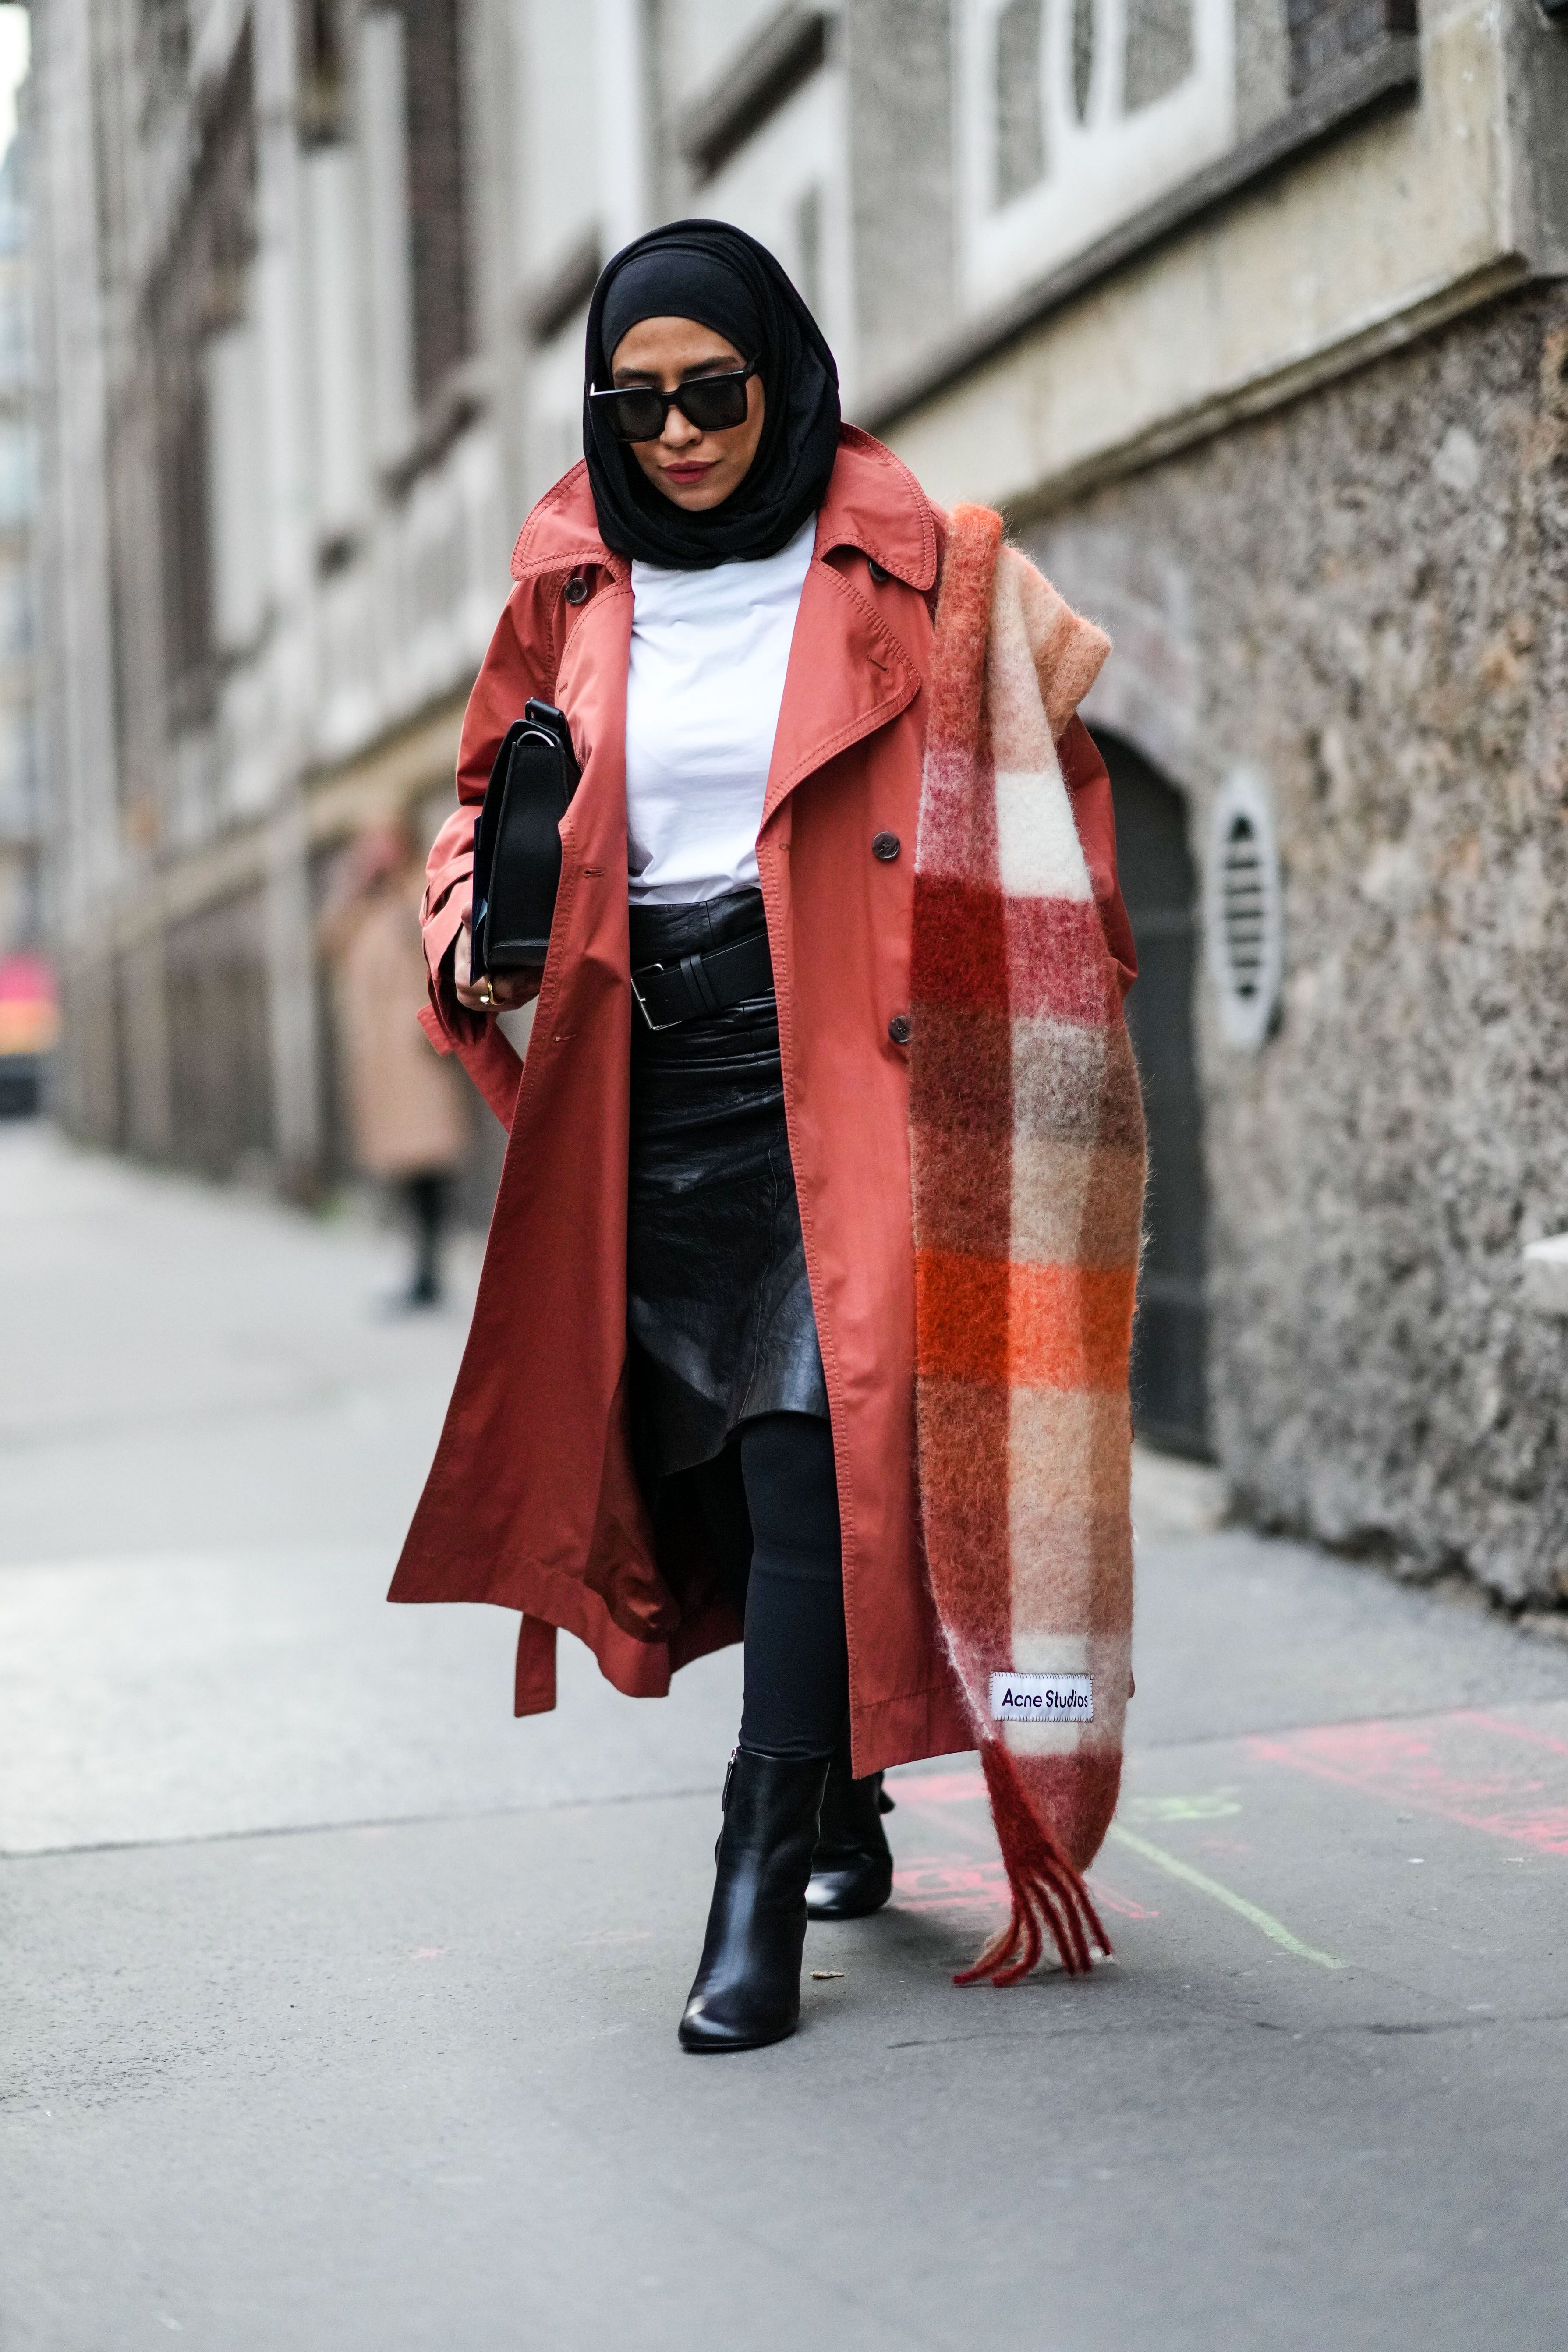 Why the Acne Studios Scarf Is Still a Winter Status Accessory